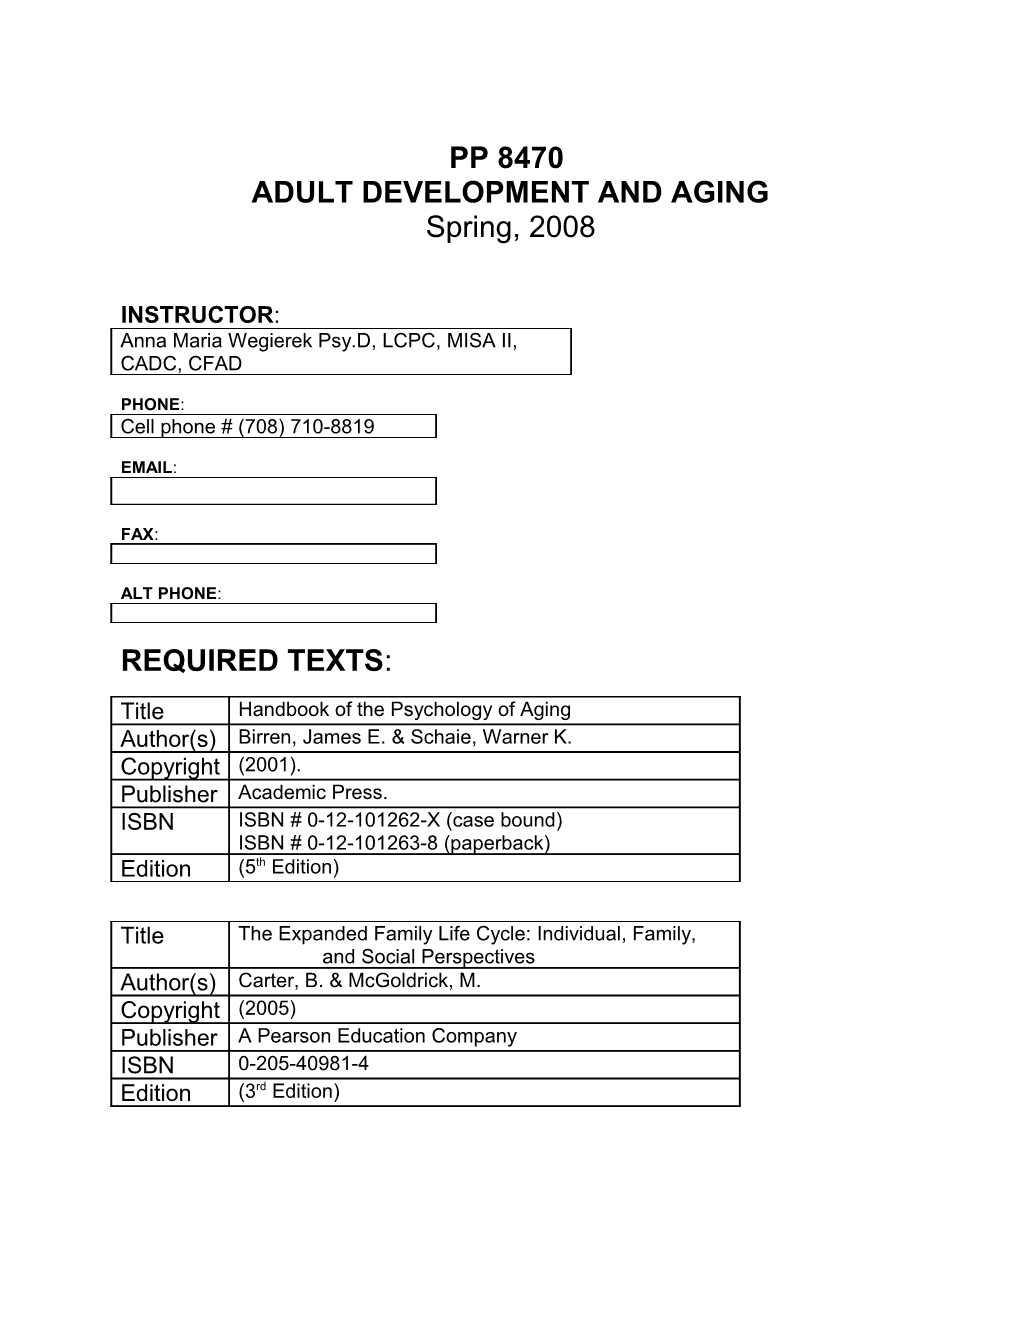 Pp 8470 Adult Development and Aging